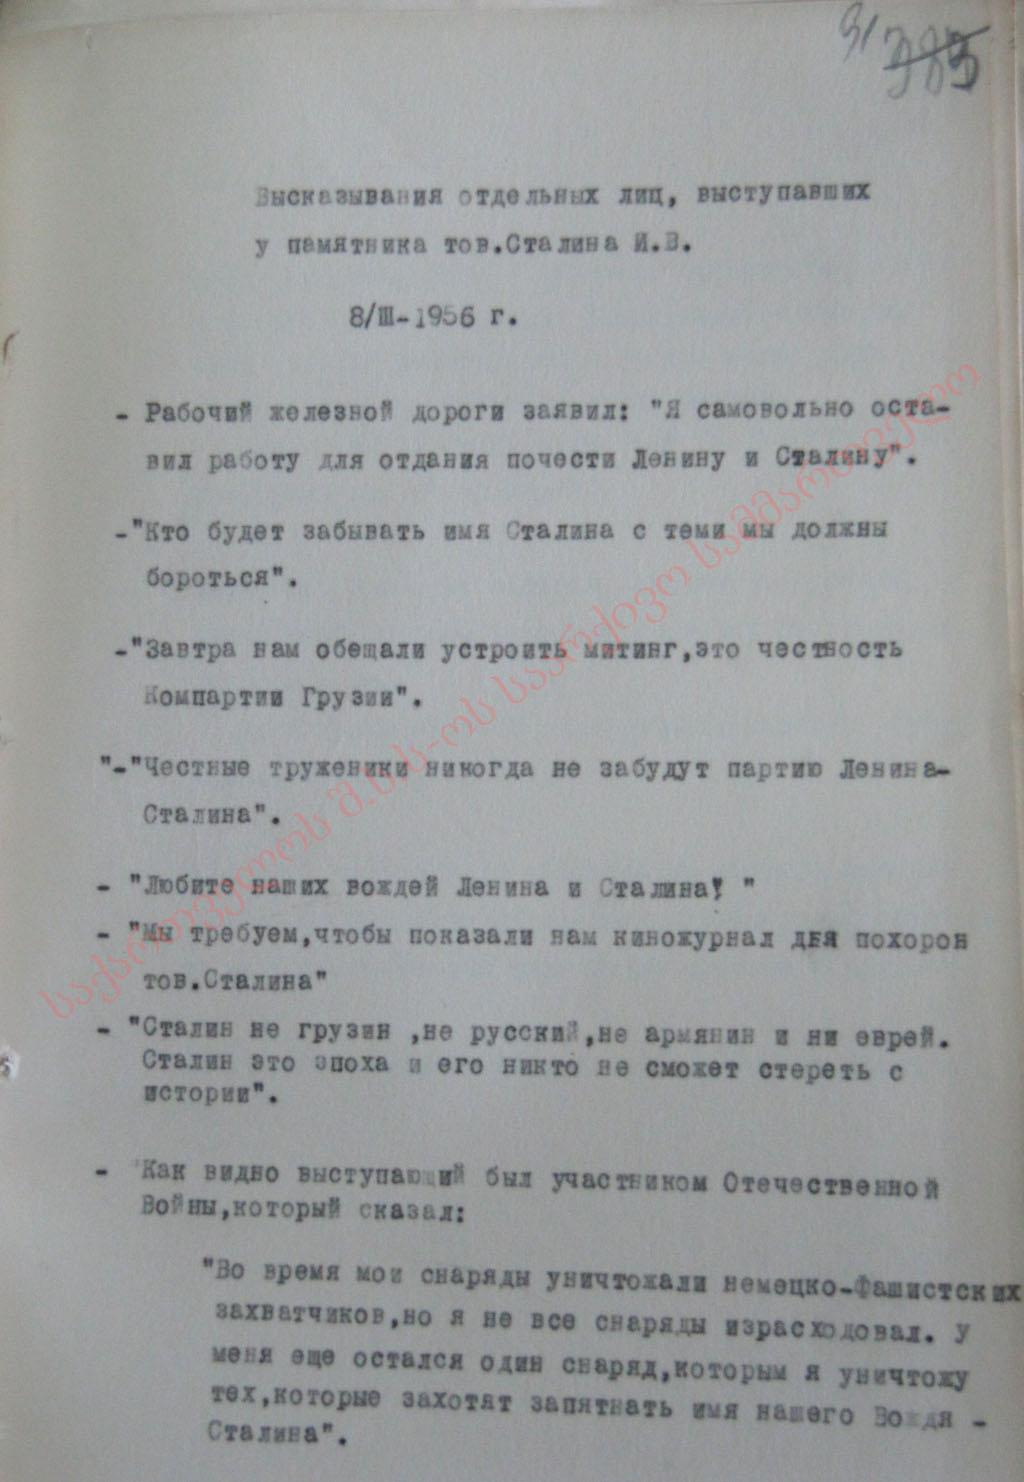 The speeches of the activists recorded during the manifestation held by the statue of I.B. Stalin on March 8th, 1956.